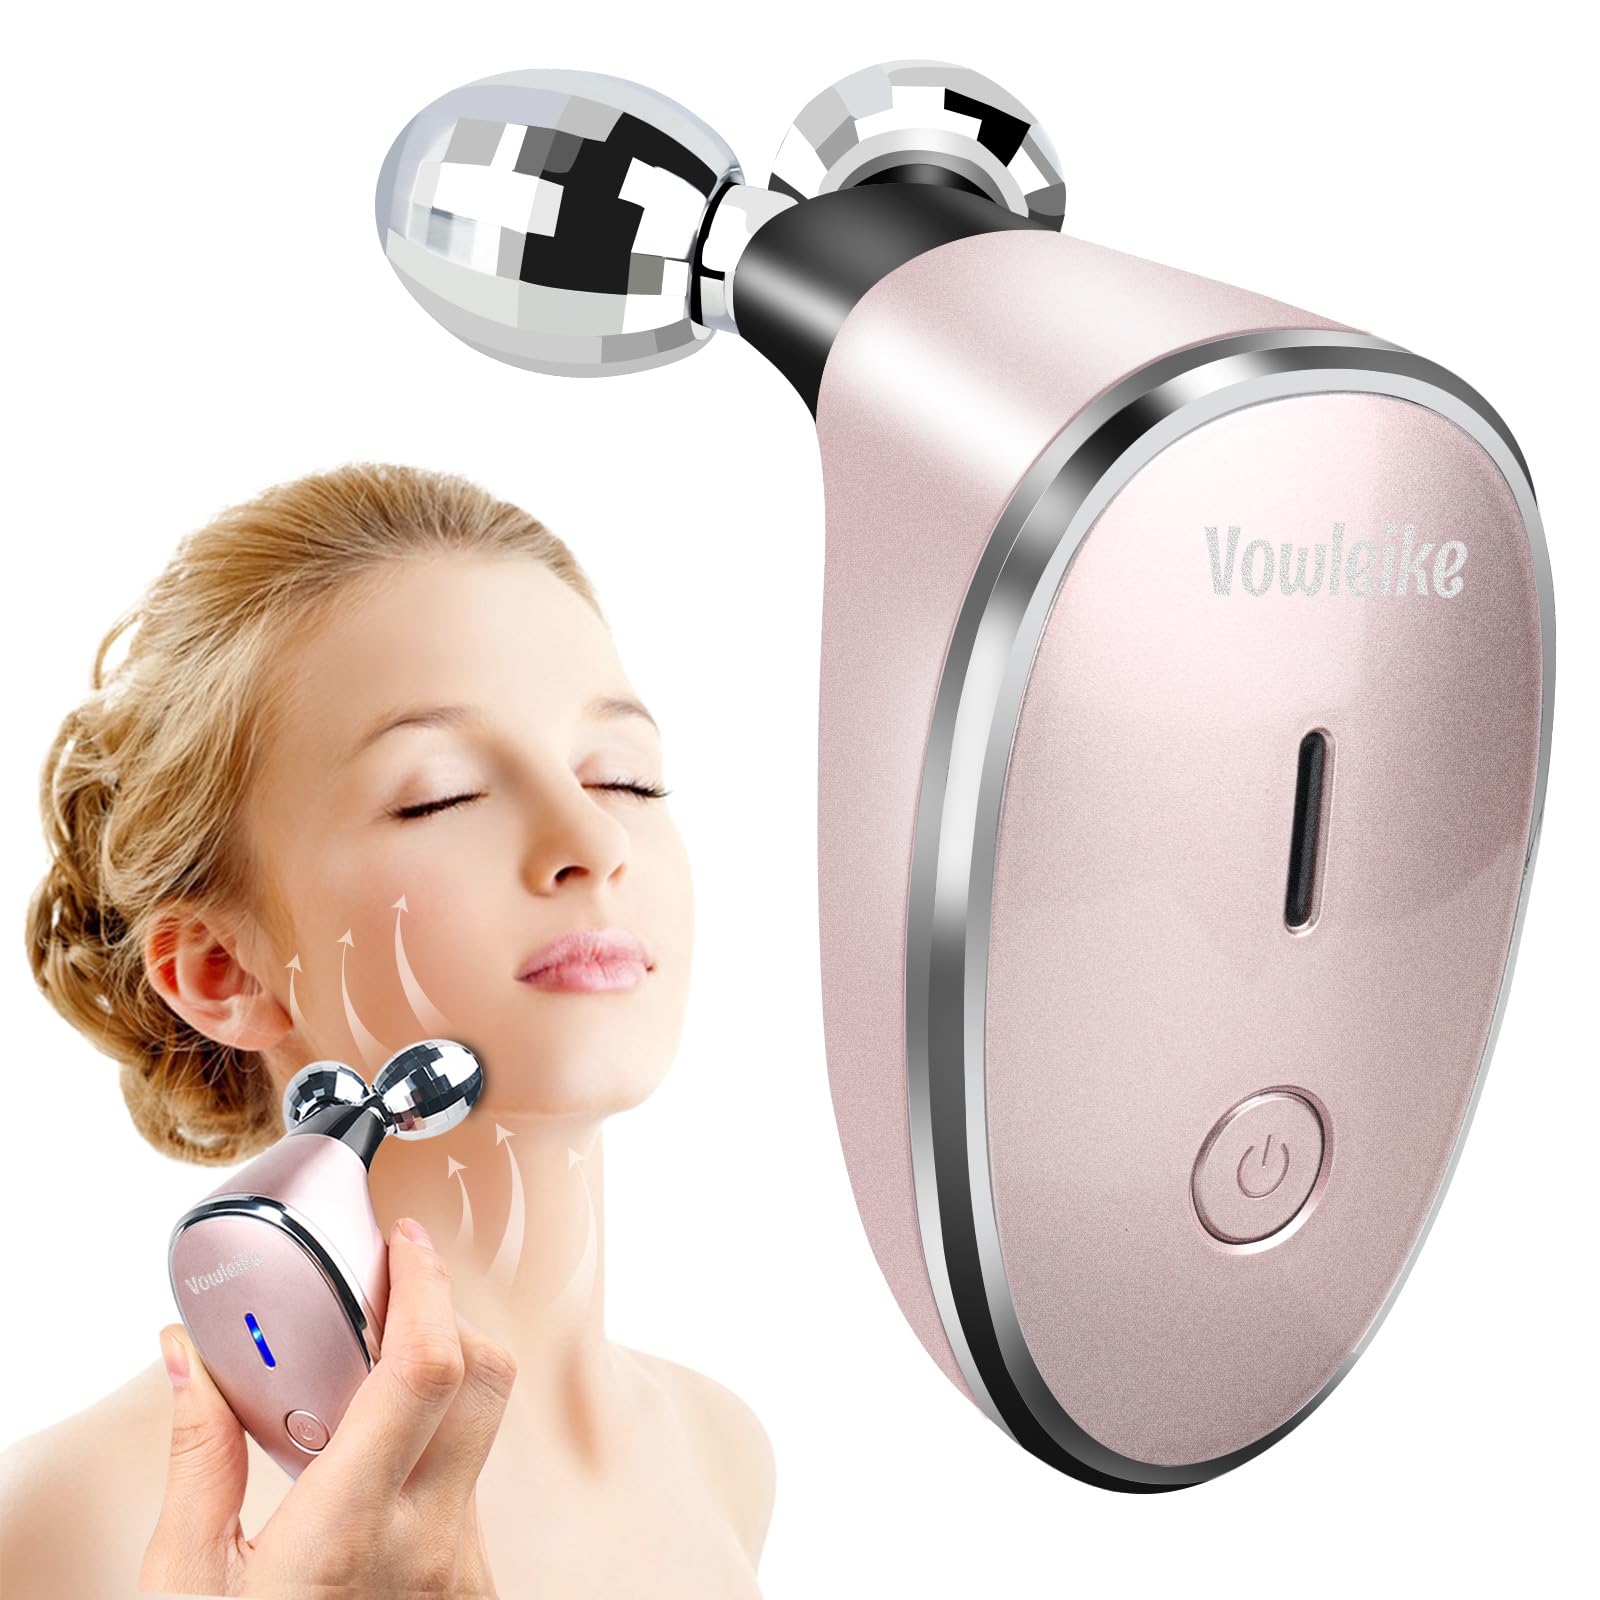 Microcurrent Facial Device Vowleike Electrical Face Lift Sculpting Tool with Stand Rechargeable Home-use Skin Lifting Tig